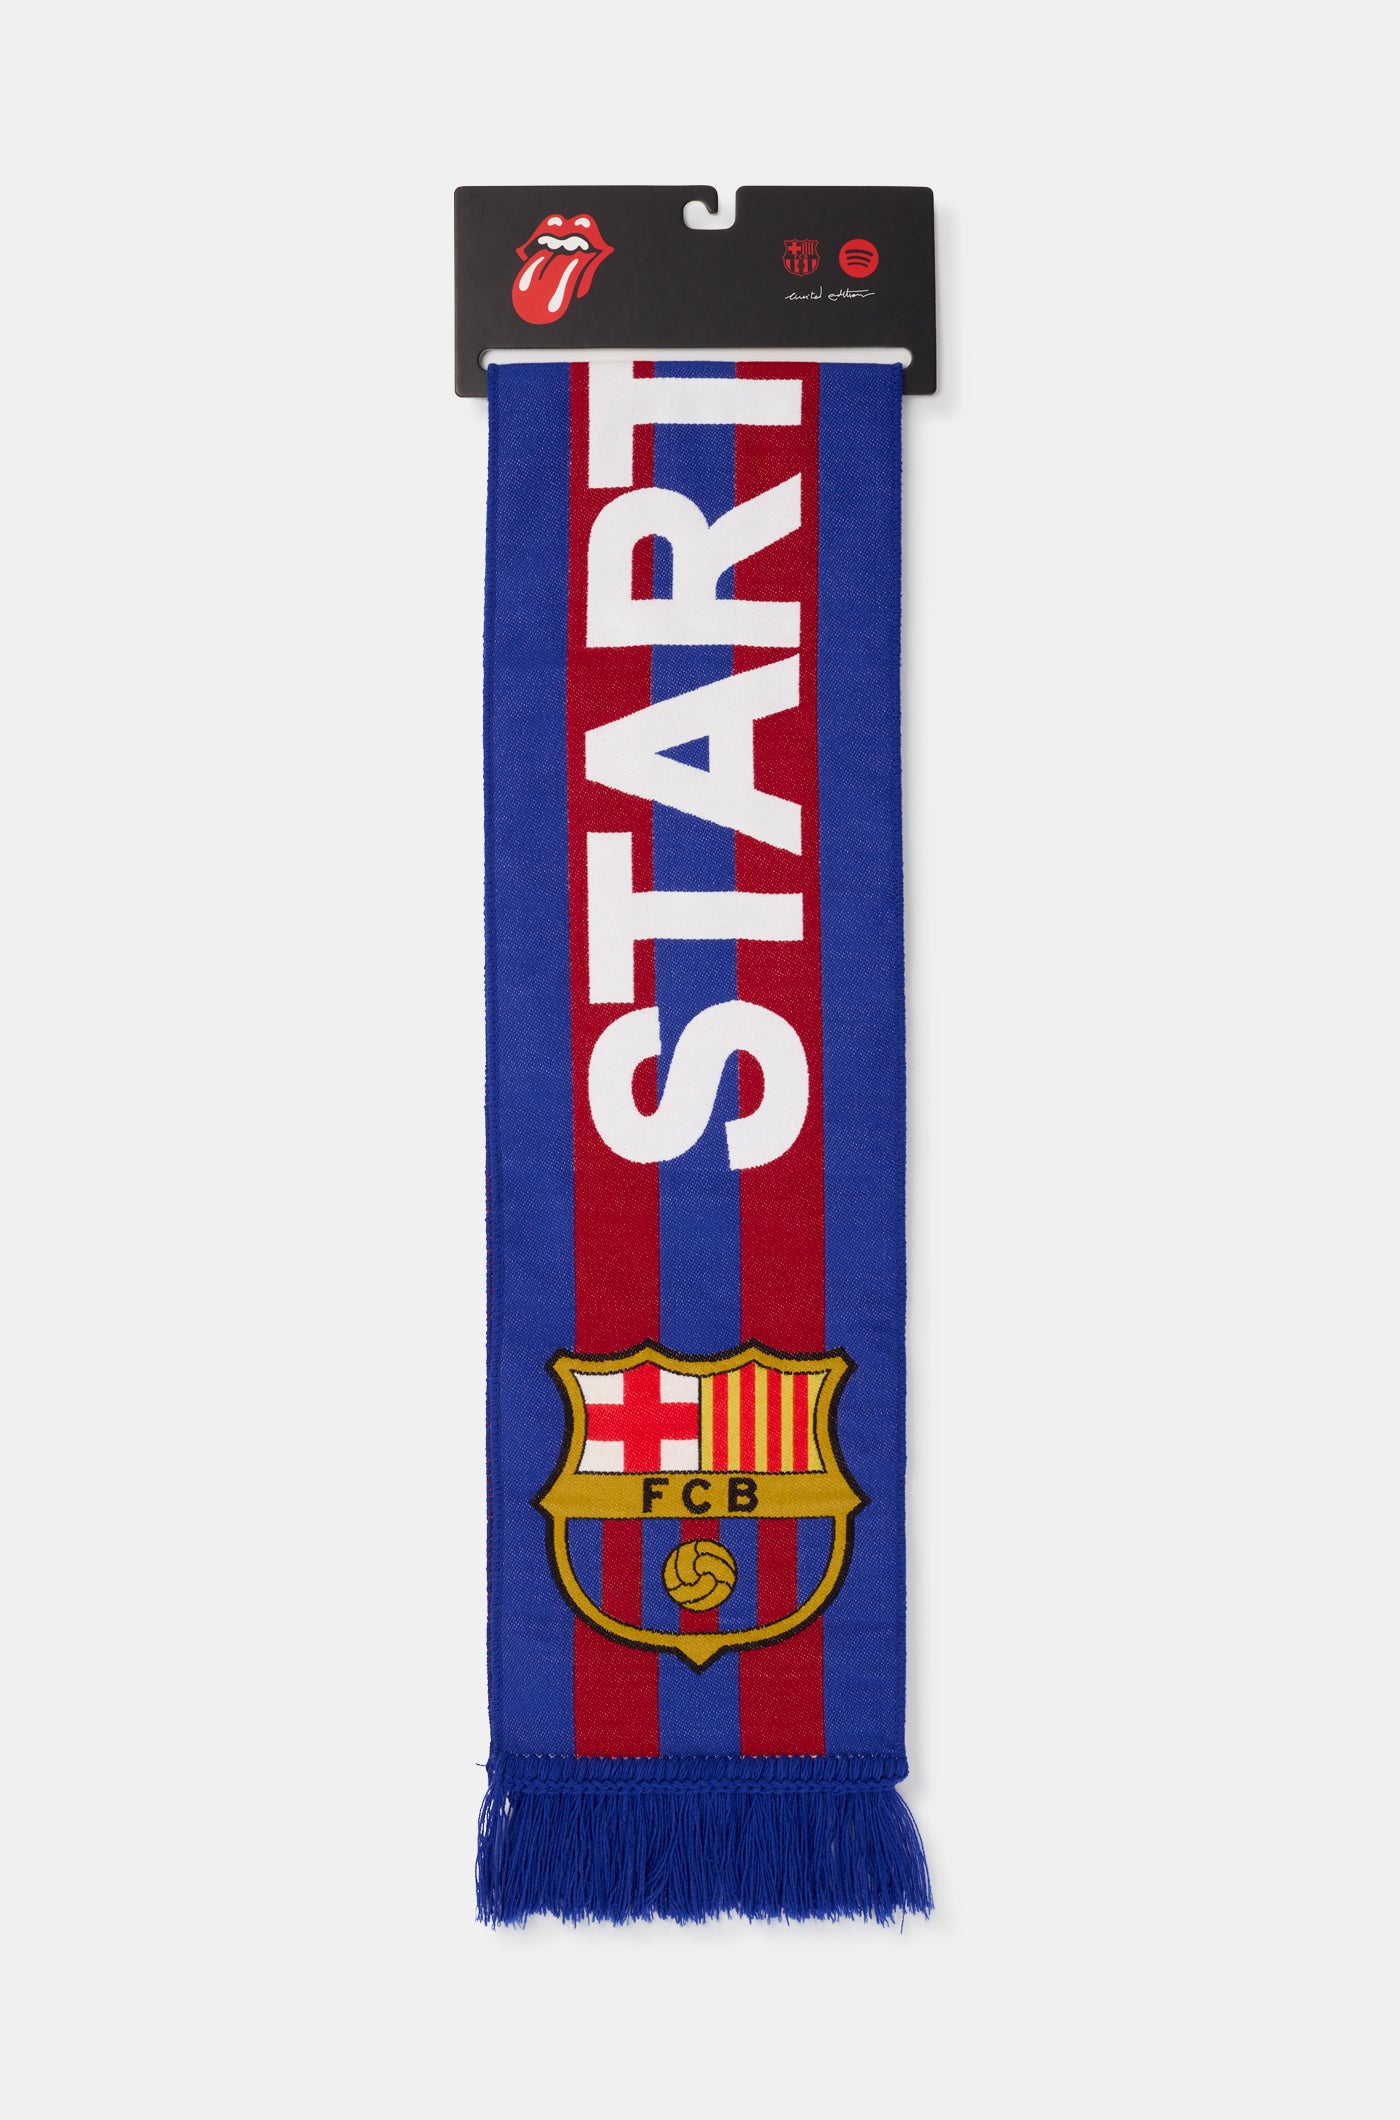 Barça x Rolling Stones limited edition scarf